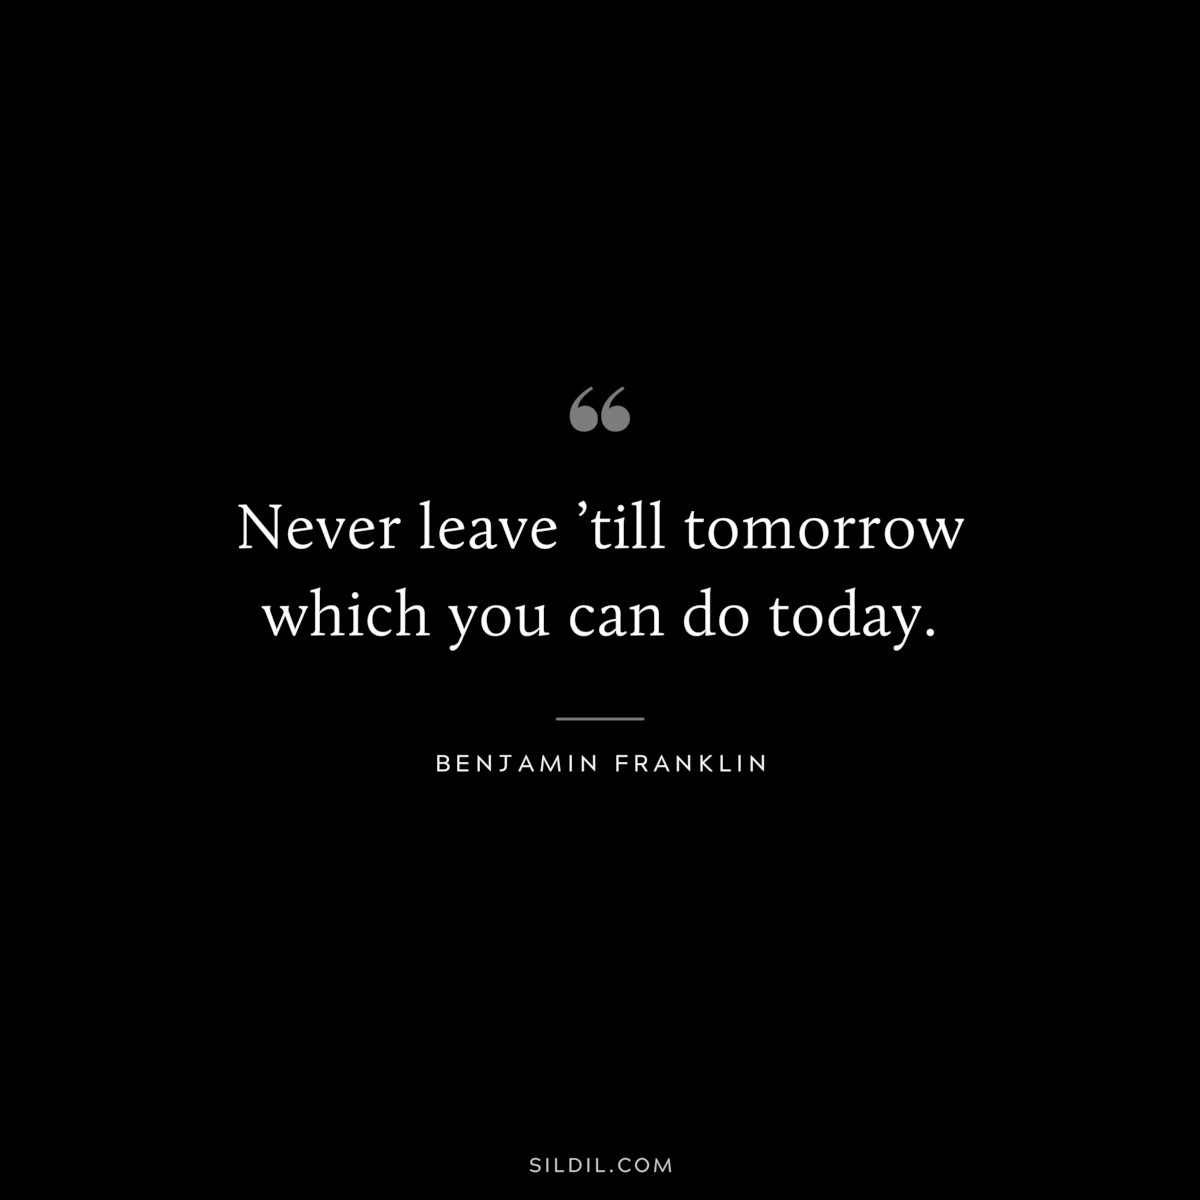 Never leave ’till tomorrow which you can do today. ― Benjamin Franklin